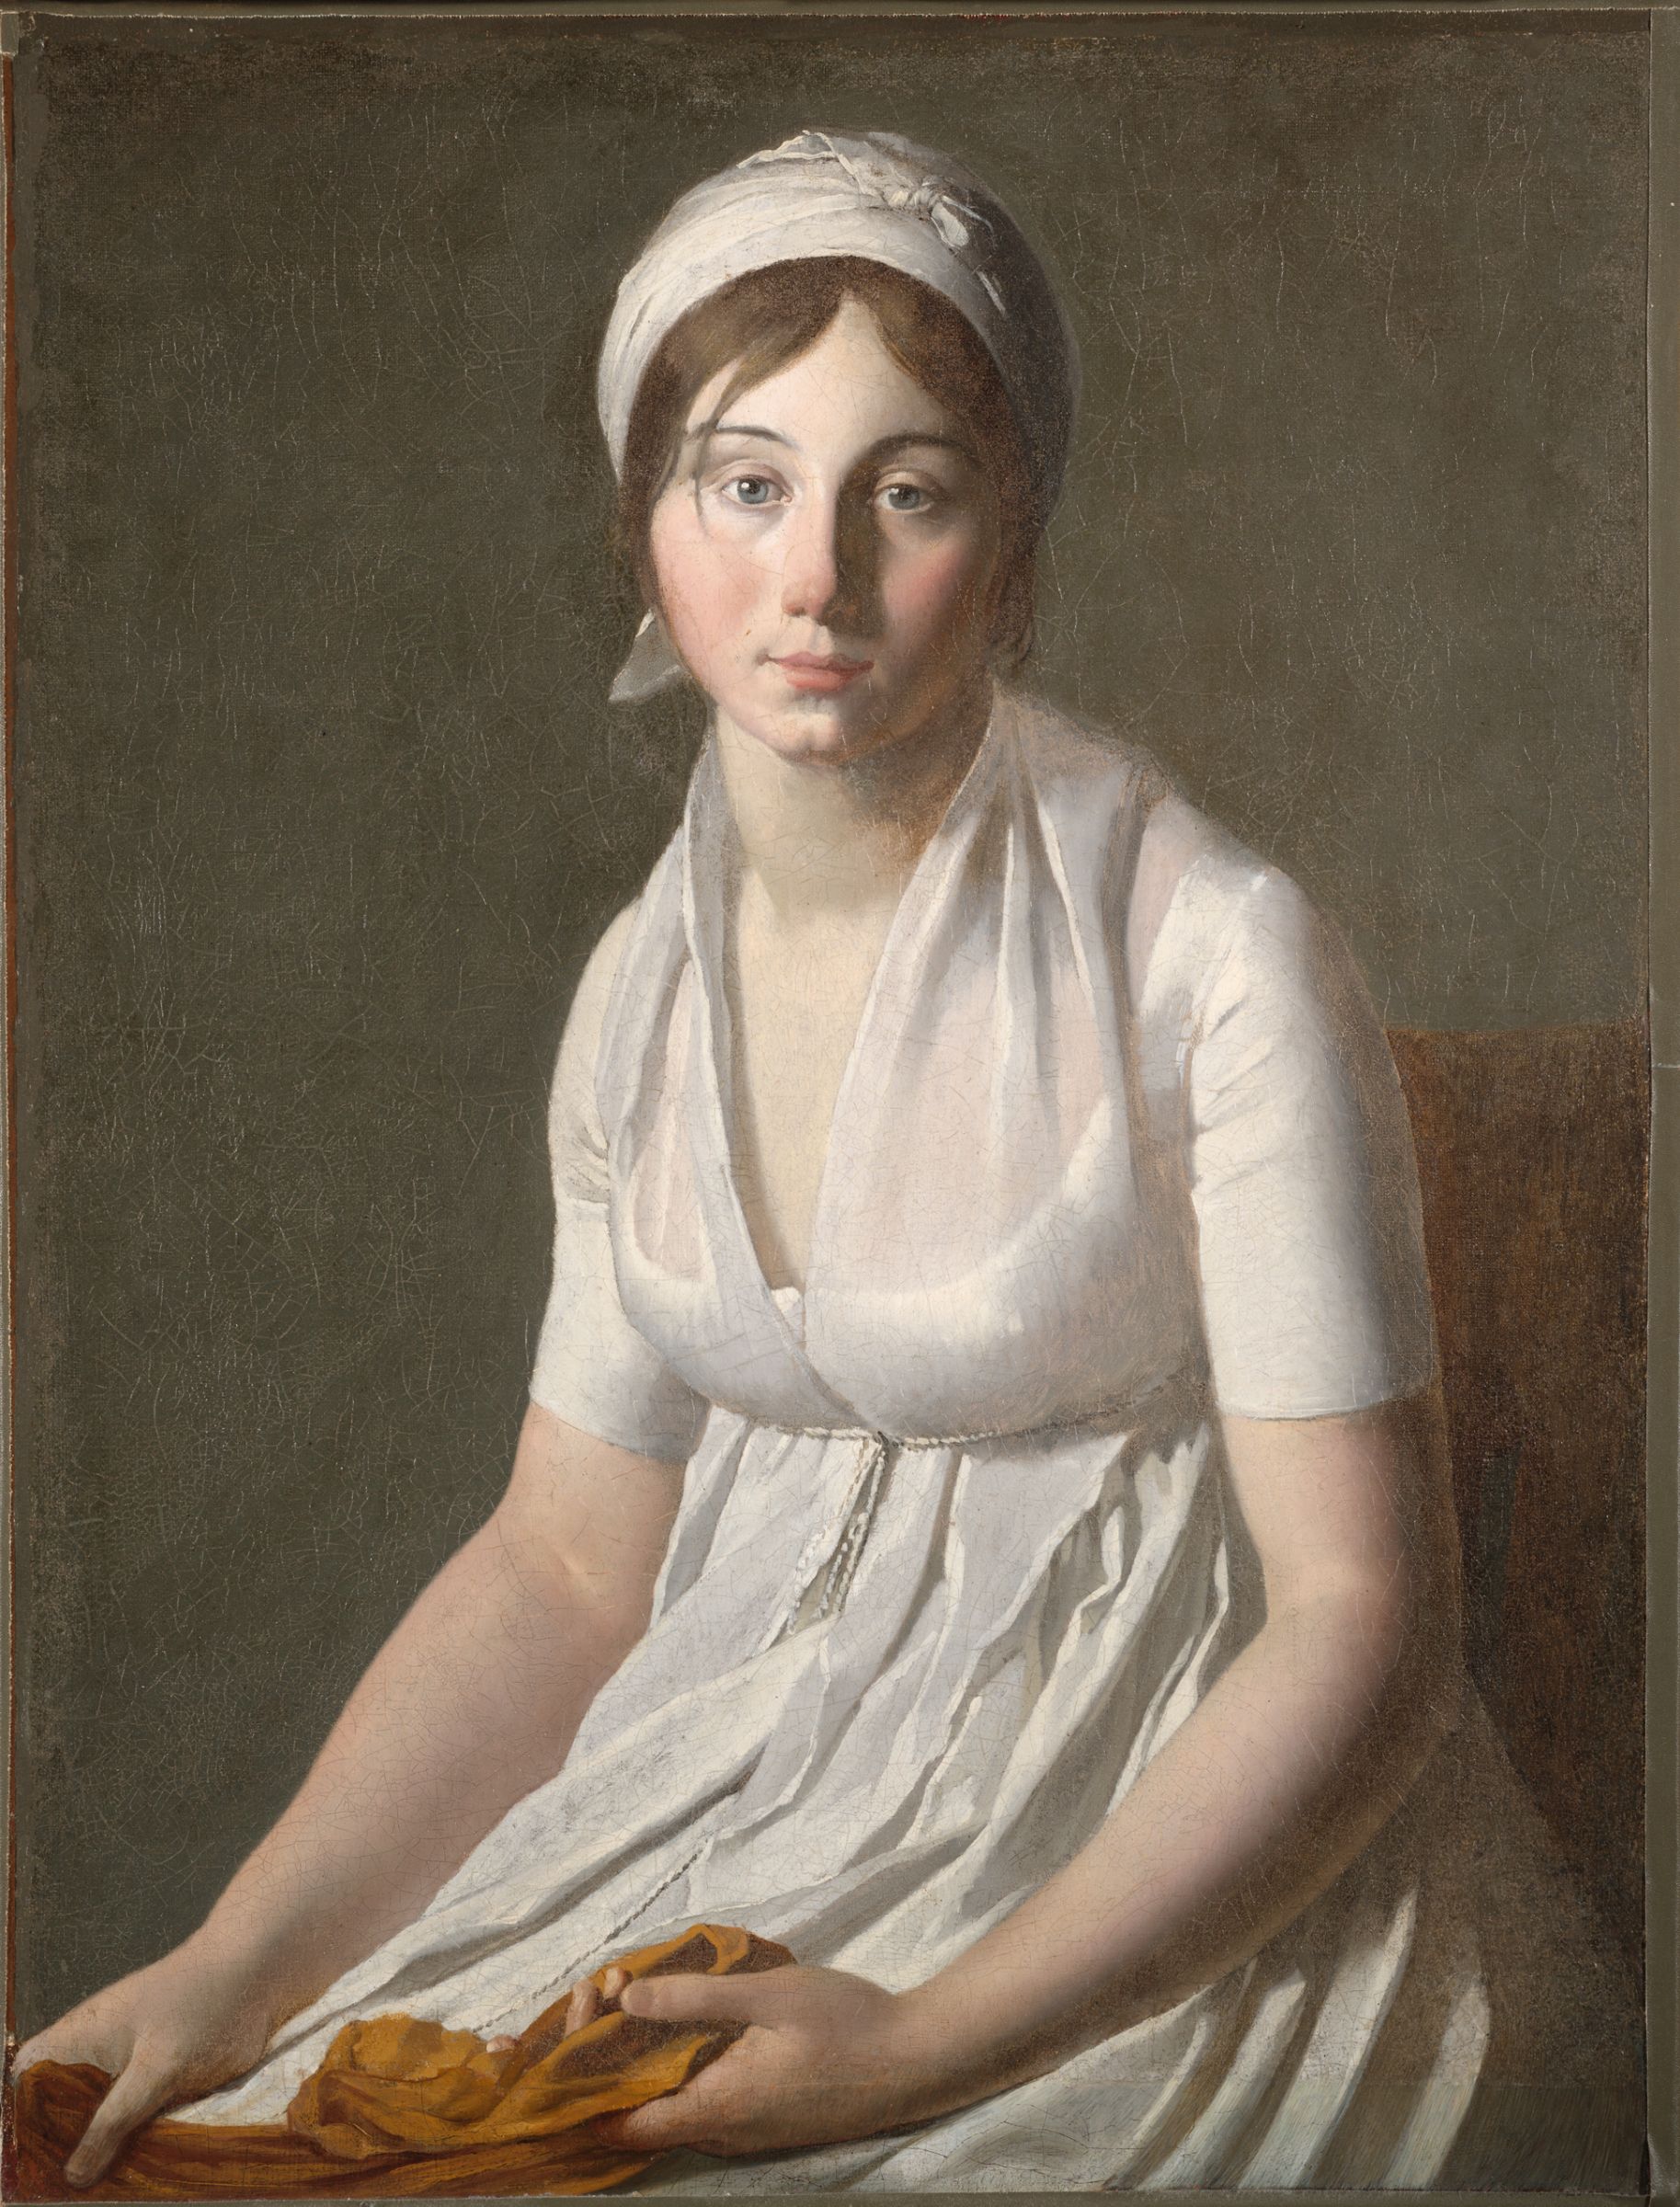 From the Harvard Art Museums' collections Portrait of a Young Woman